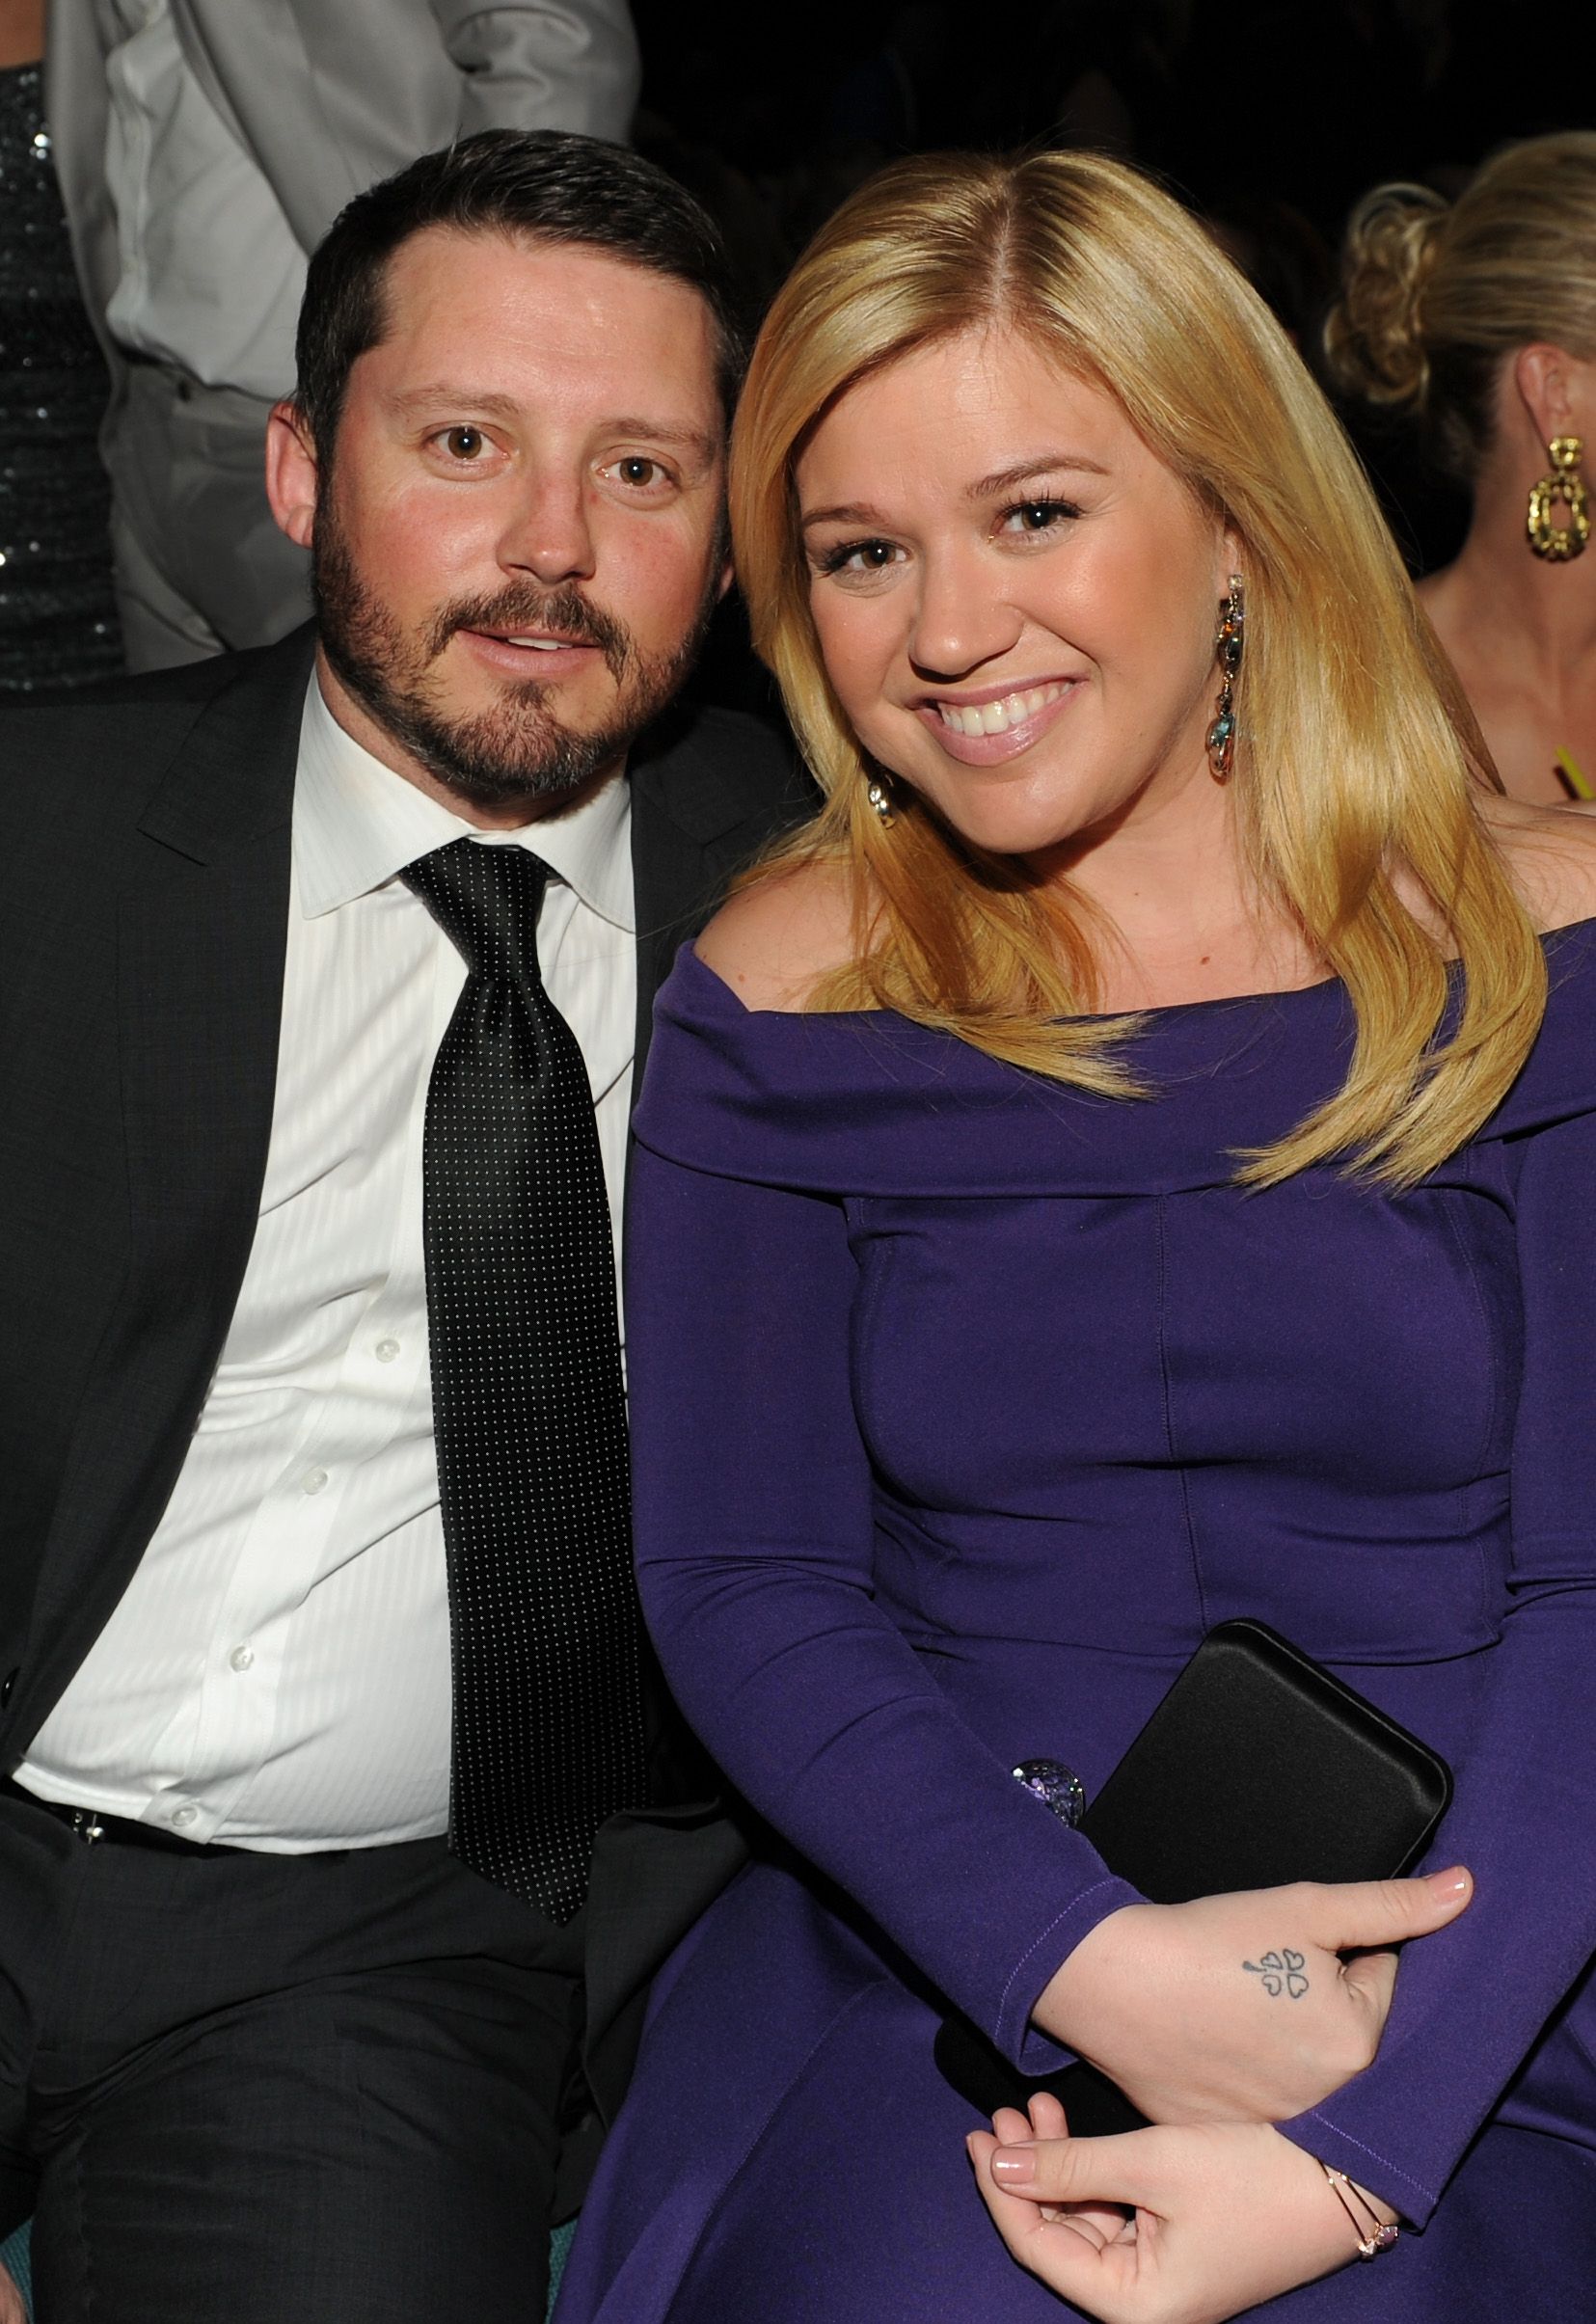 Brandon Blackstock and Kelly Clarkson at the 48th Annual Academy of Country Music Awards on April 7, 2013, in Las Vegas, Nevada. | Source: Kevin Winter/ACMA2013/Getty Images